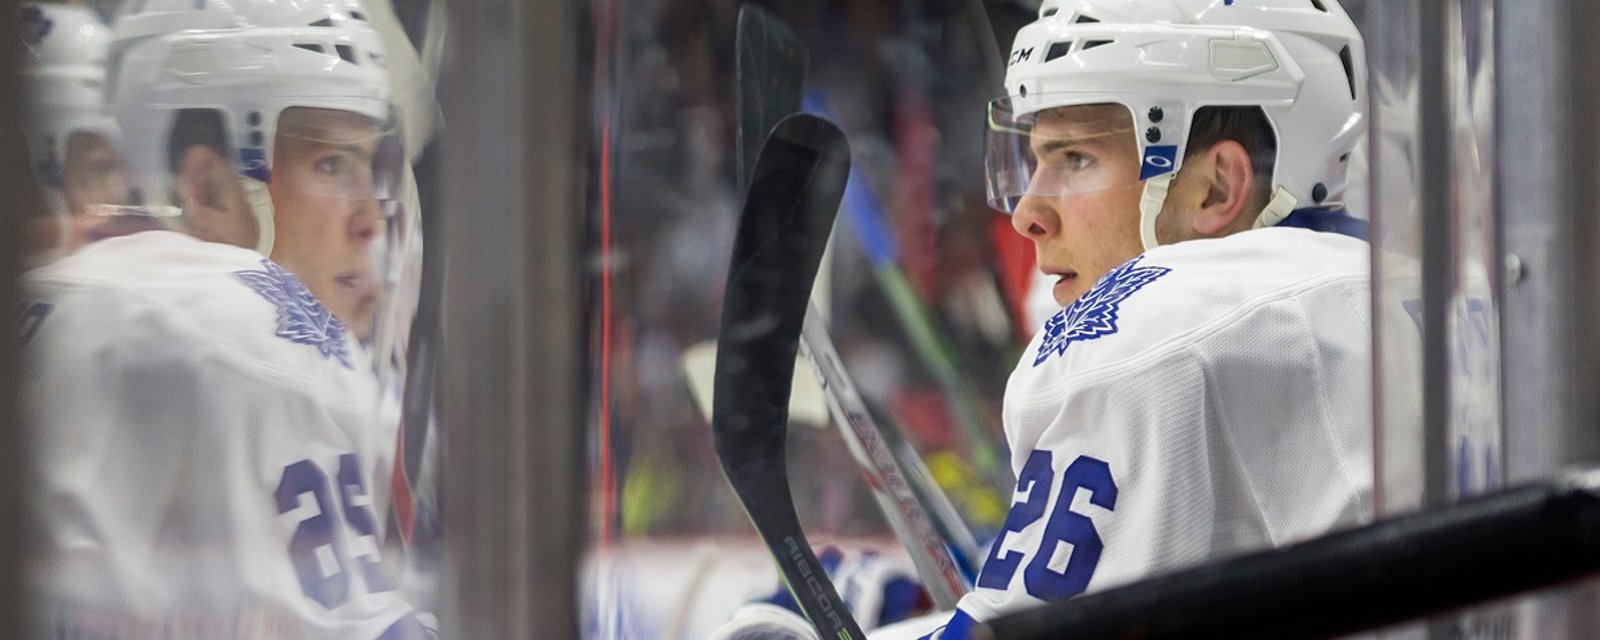 Leafs forward misses skate with complications from previous injury.